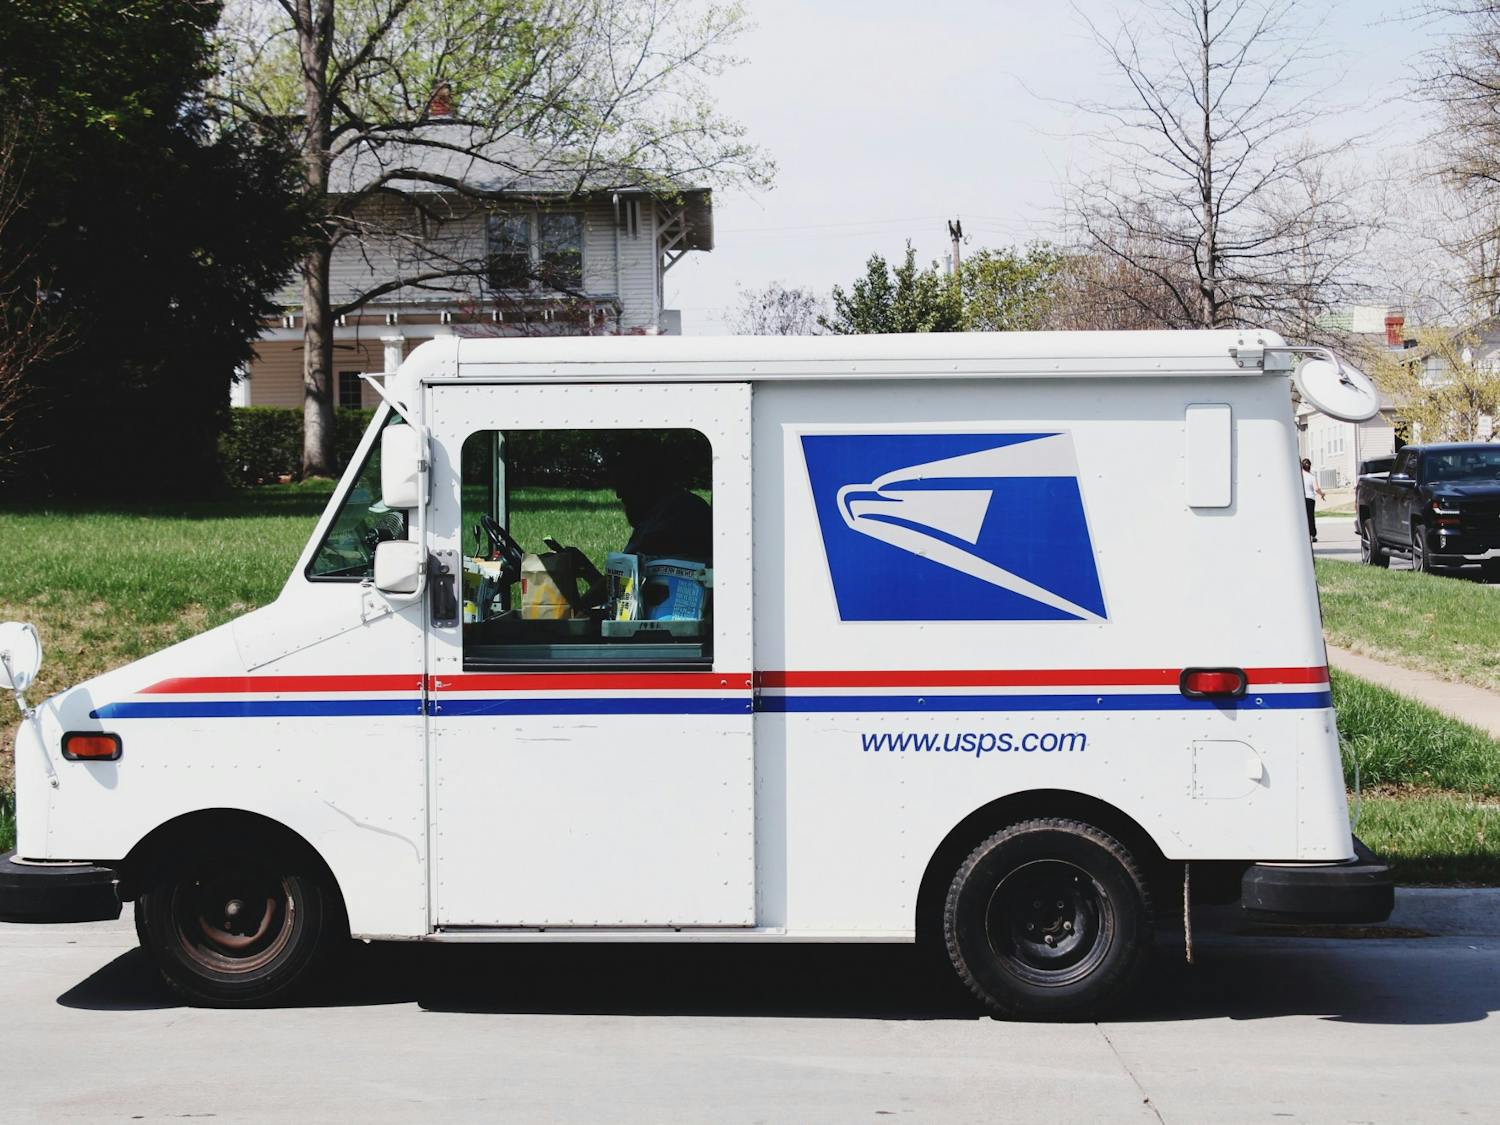 Mail carriers get paid time off, health insurance and a pension.